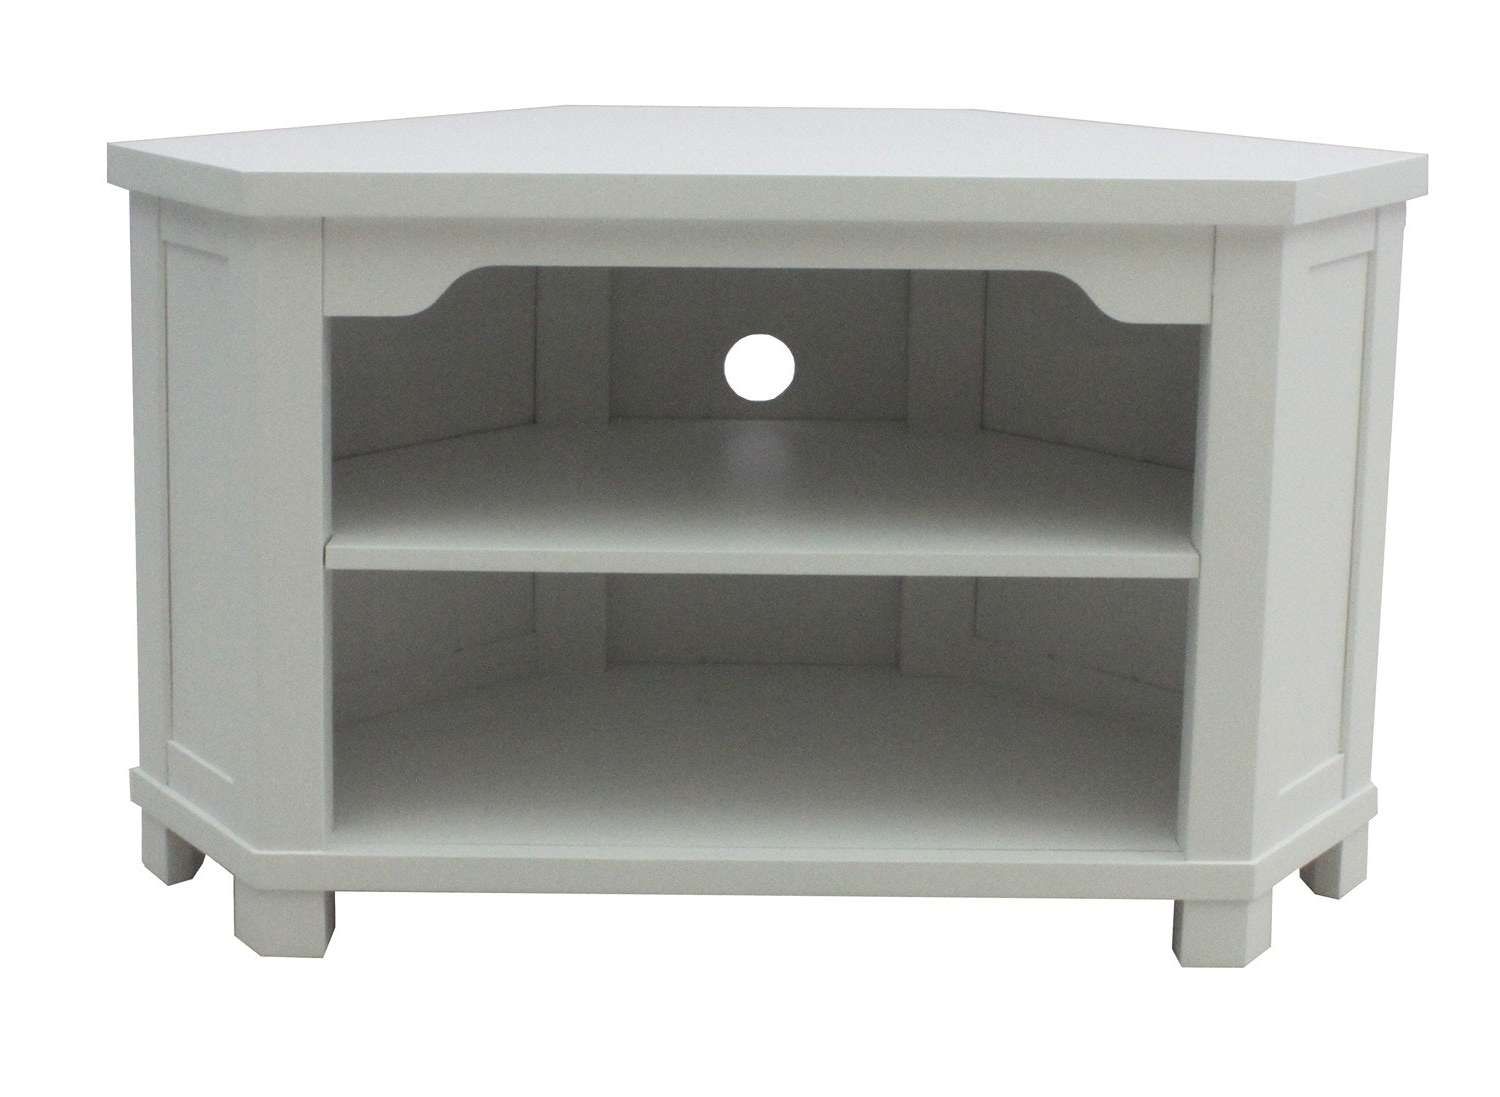 Small White Tv Cabinet Photo On Astounding White Corner Tv Cabinet Throughout White Corner Tv Cabinets (View 14 of 20)